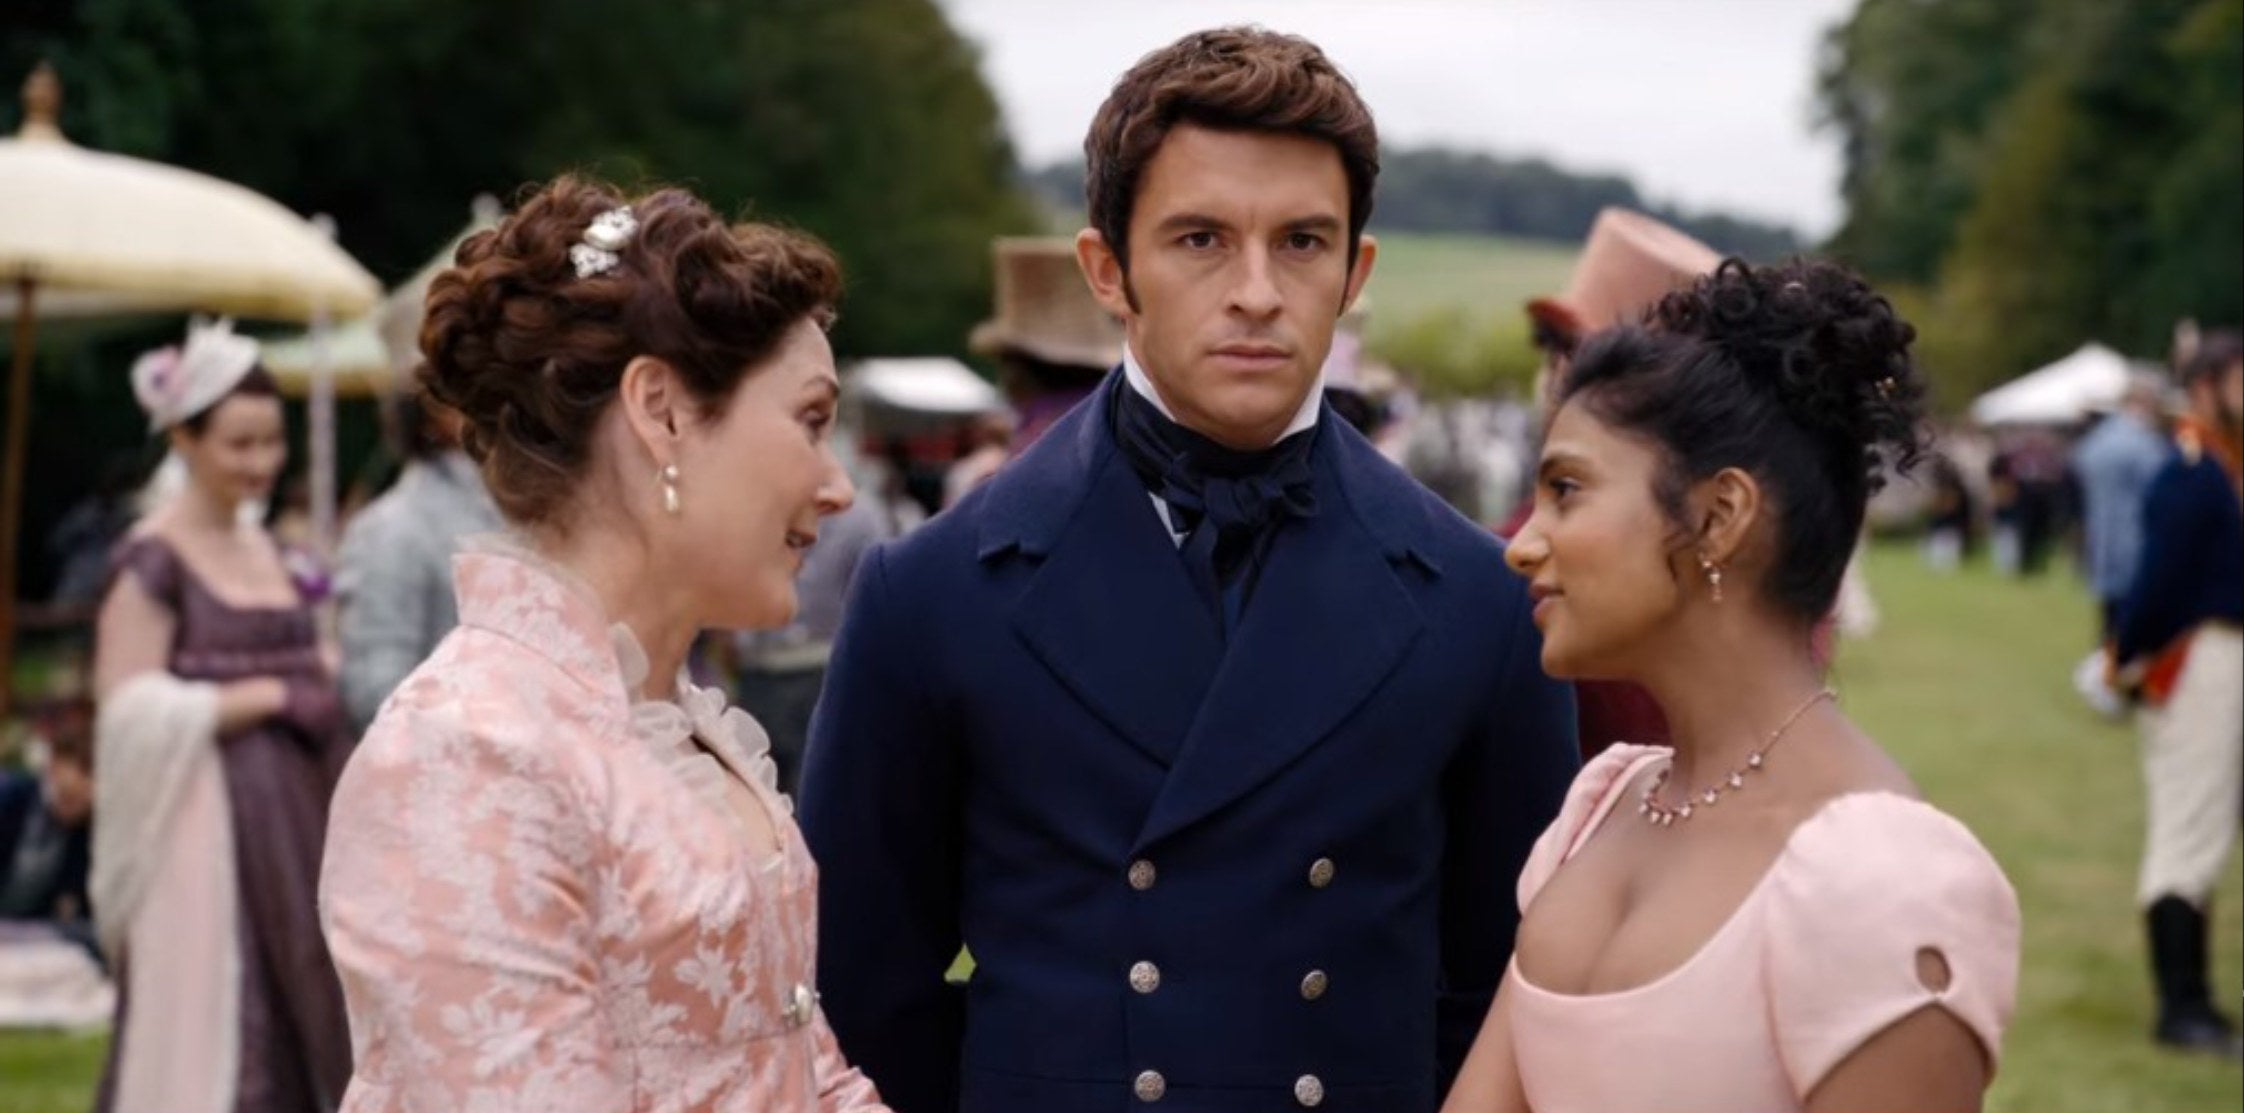 Anthony looking at Kate (off-screen) while standing with his mother, Violet Bridgerton, and Edwina Sharma.